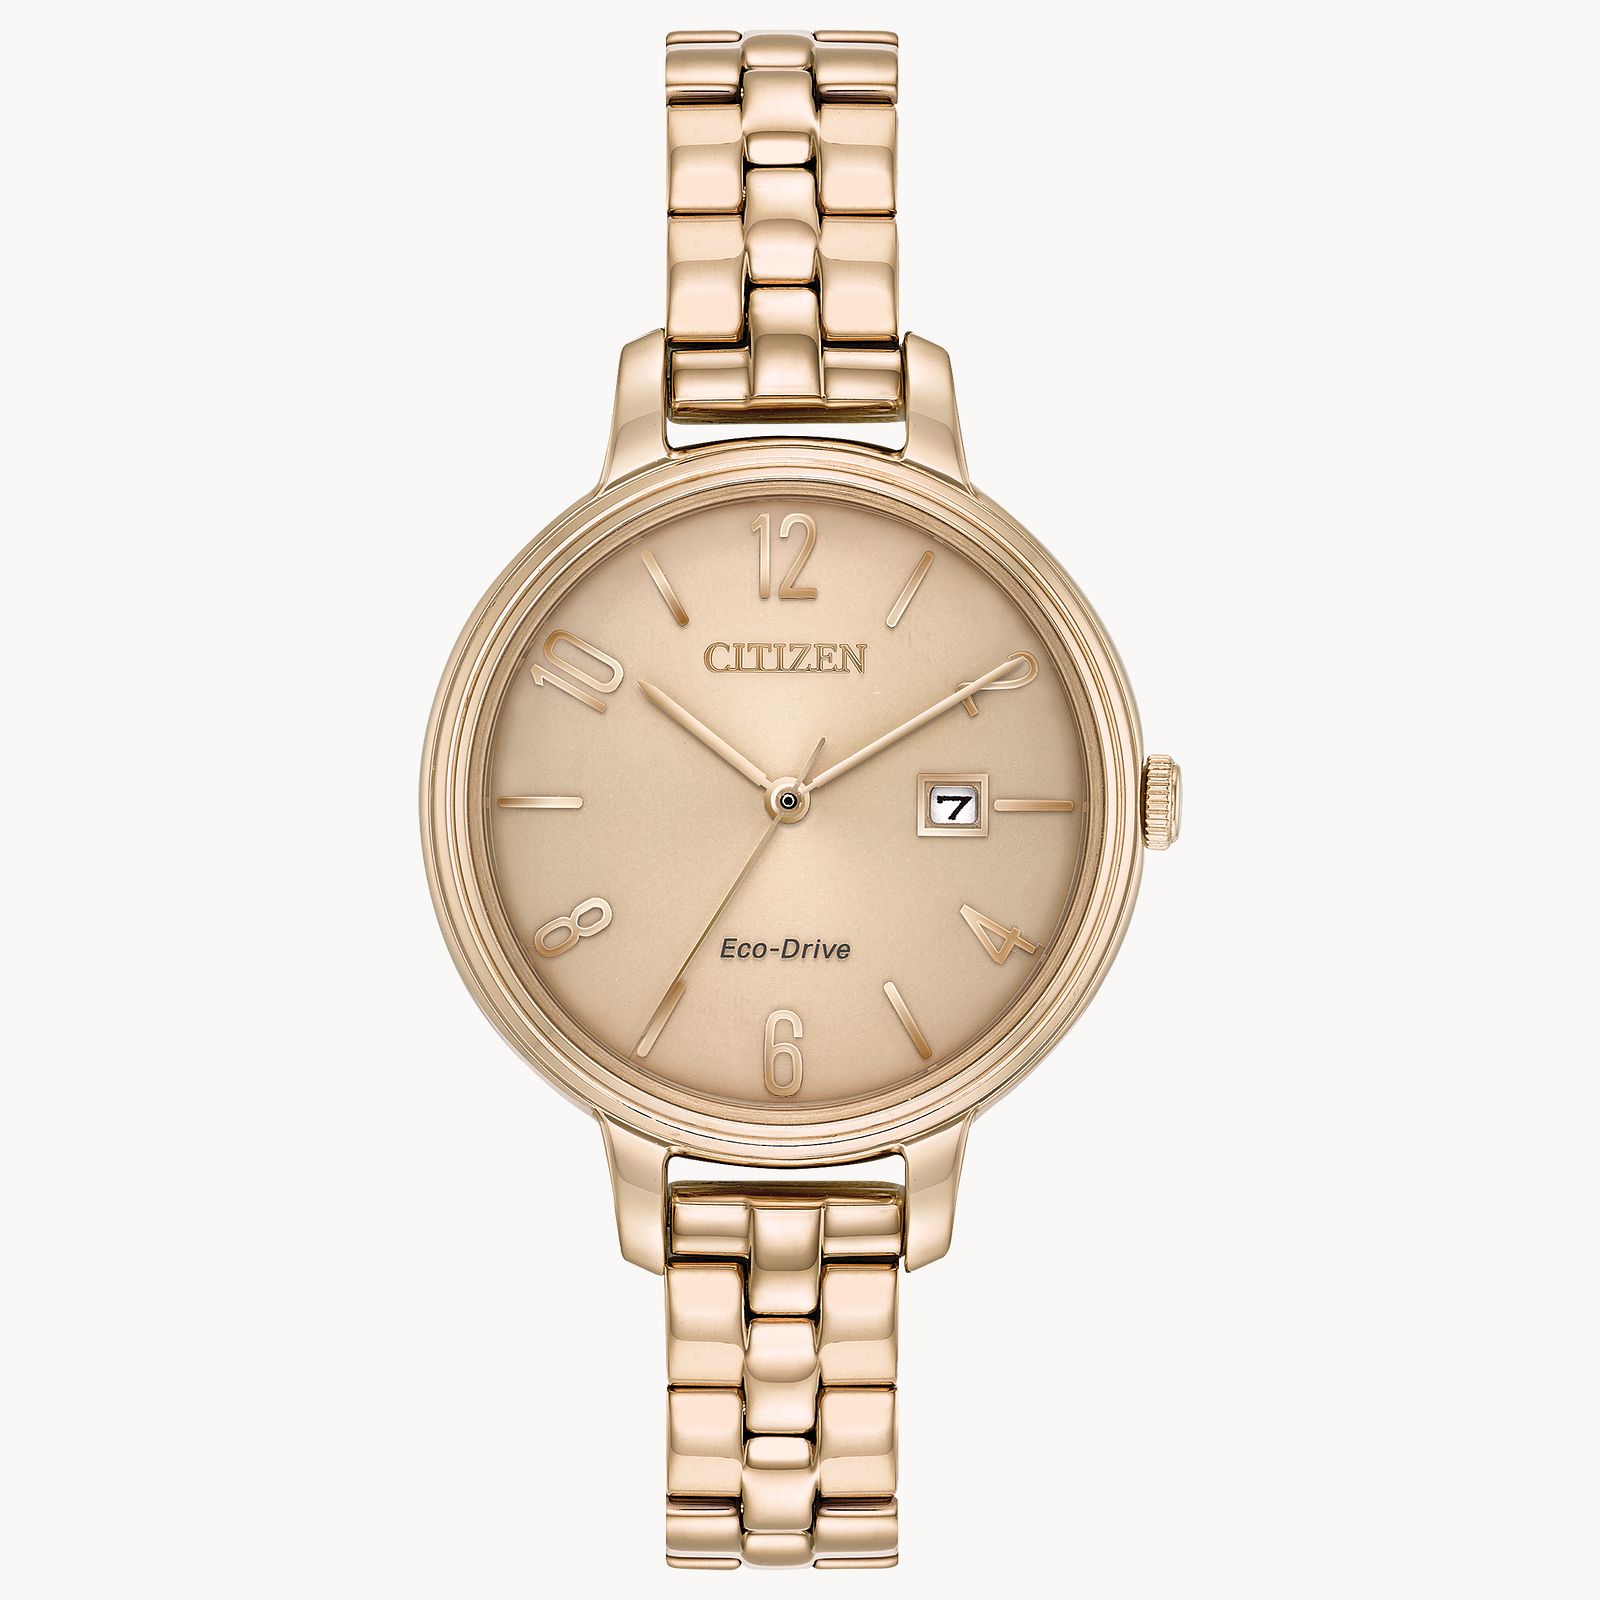 Citizen Lady's Eco Drive Chandler Watch | Harry Ritchie's